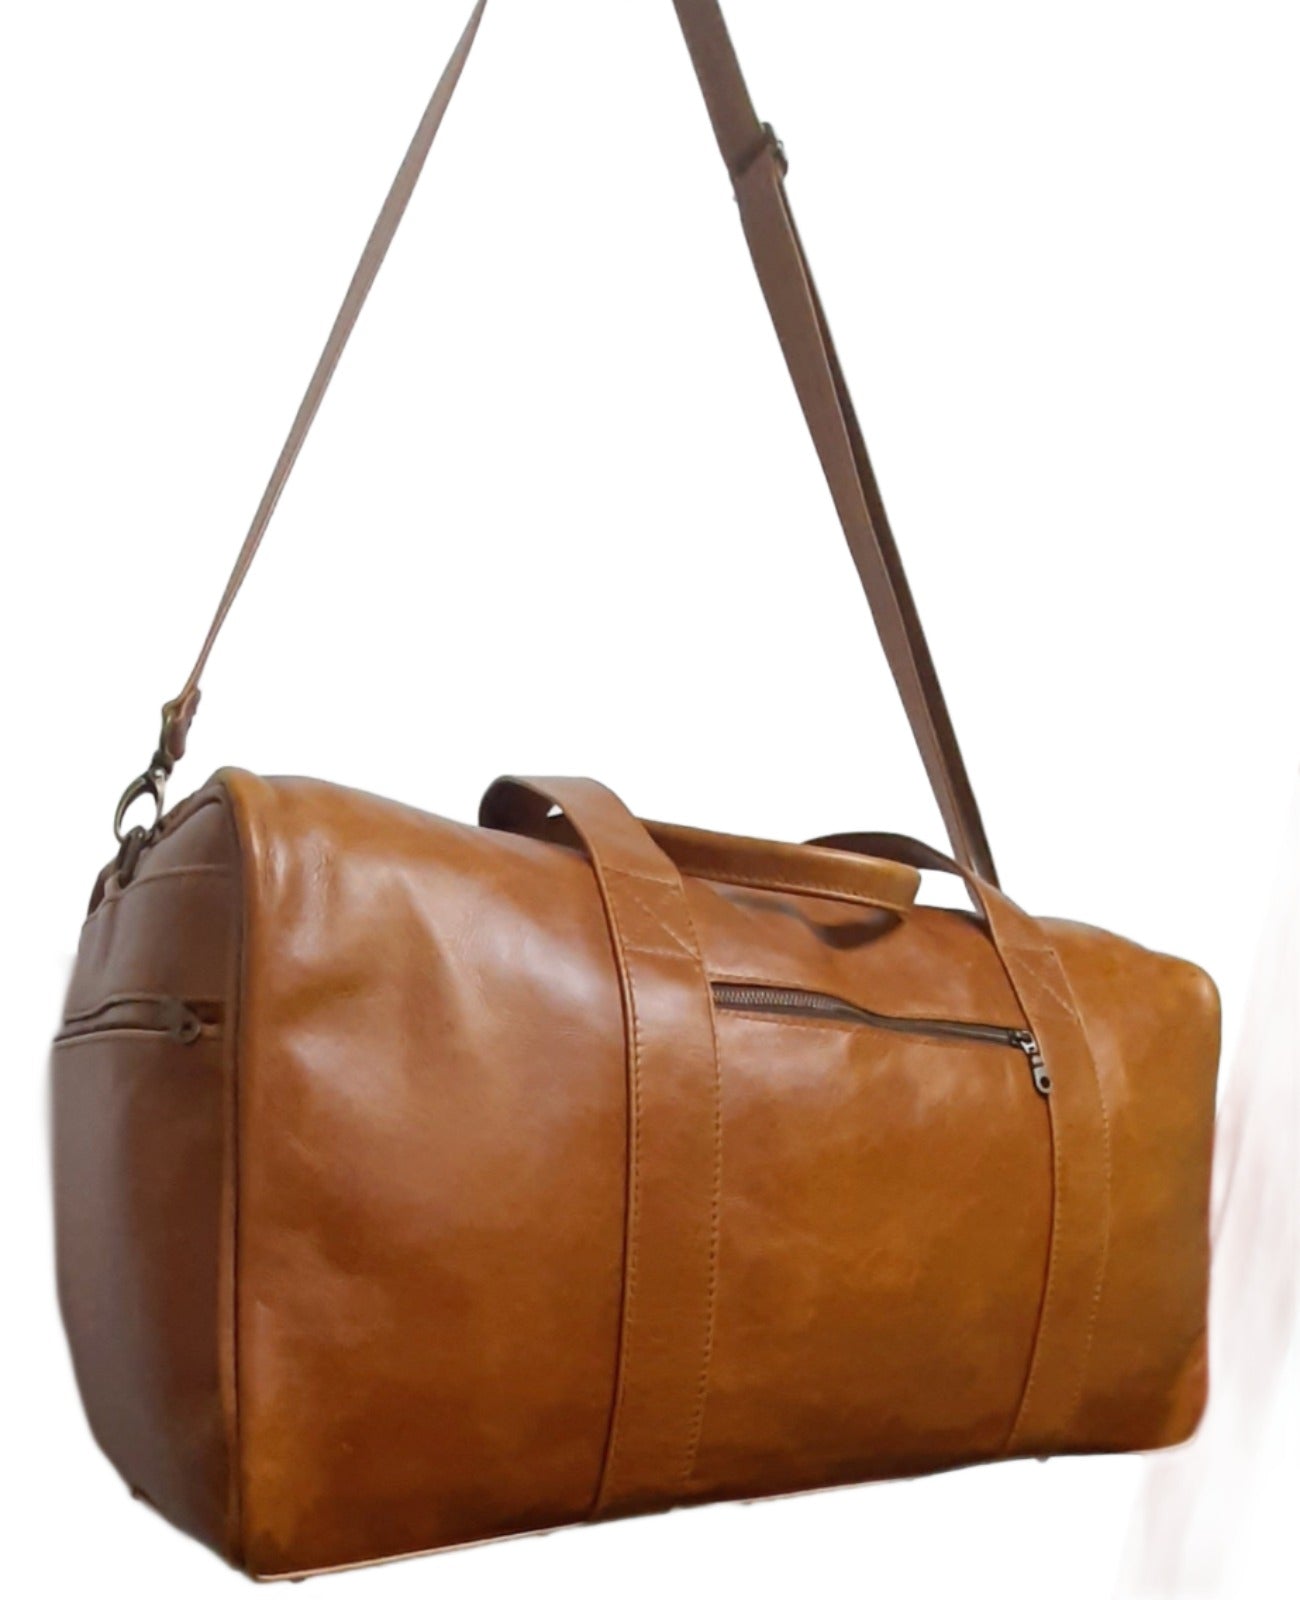 A beautiful light tan geniune leather travel bag extra large 